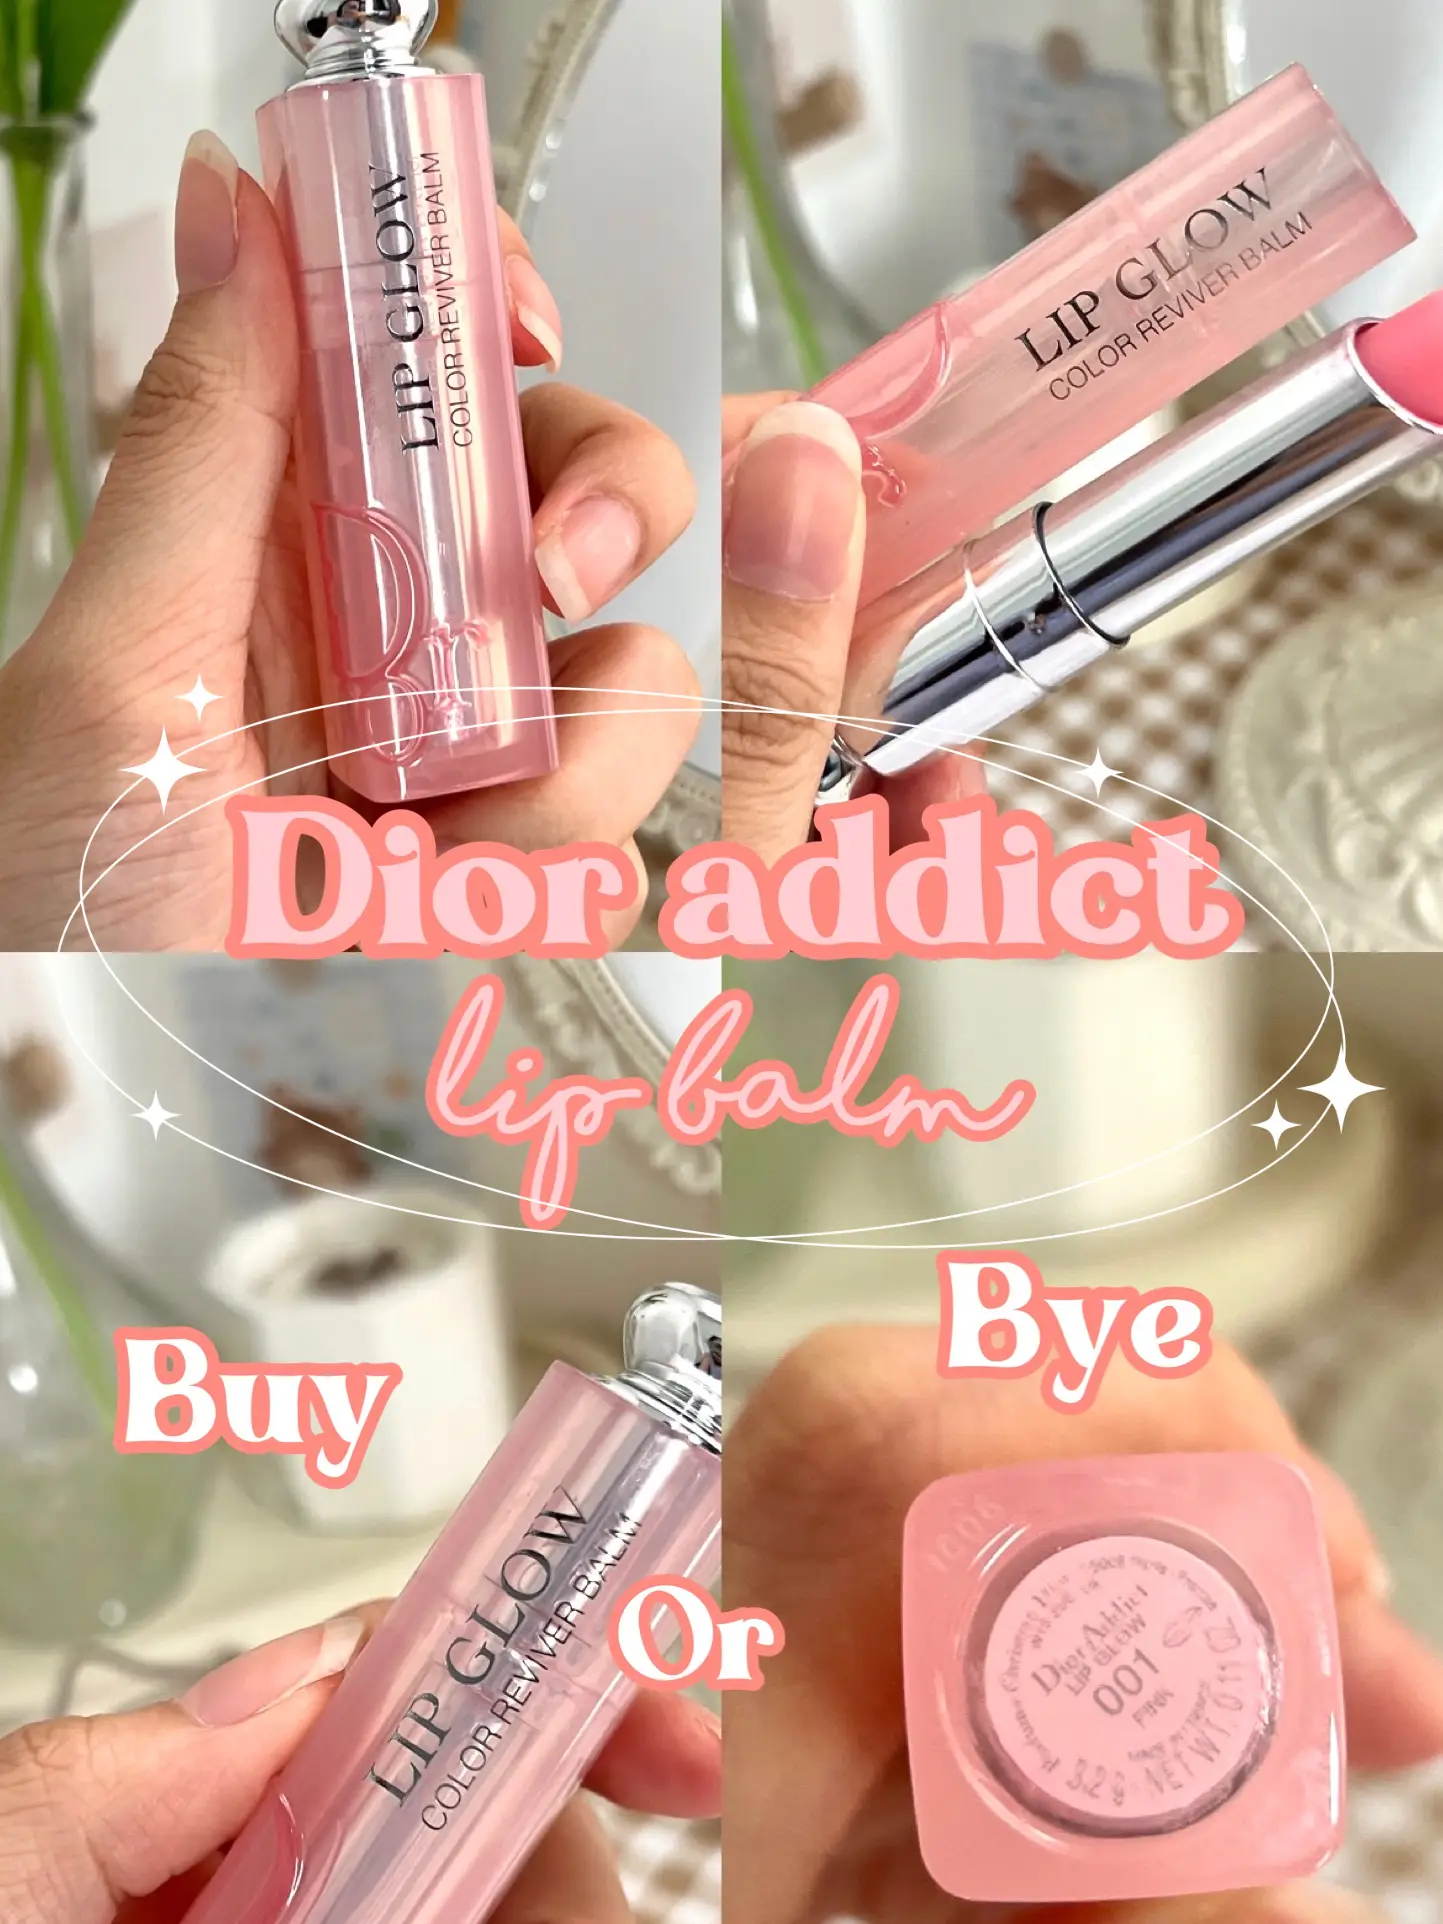 Dior Addict Lip Balm ✨ BUY OR BYE? | Gallery posted by 𝓙𝓸𝓬𝓮𝓵𝔂𝓷✨ |  Lemon8